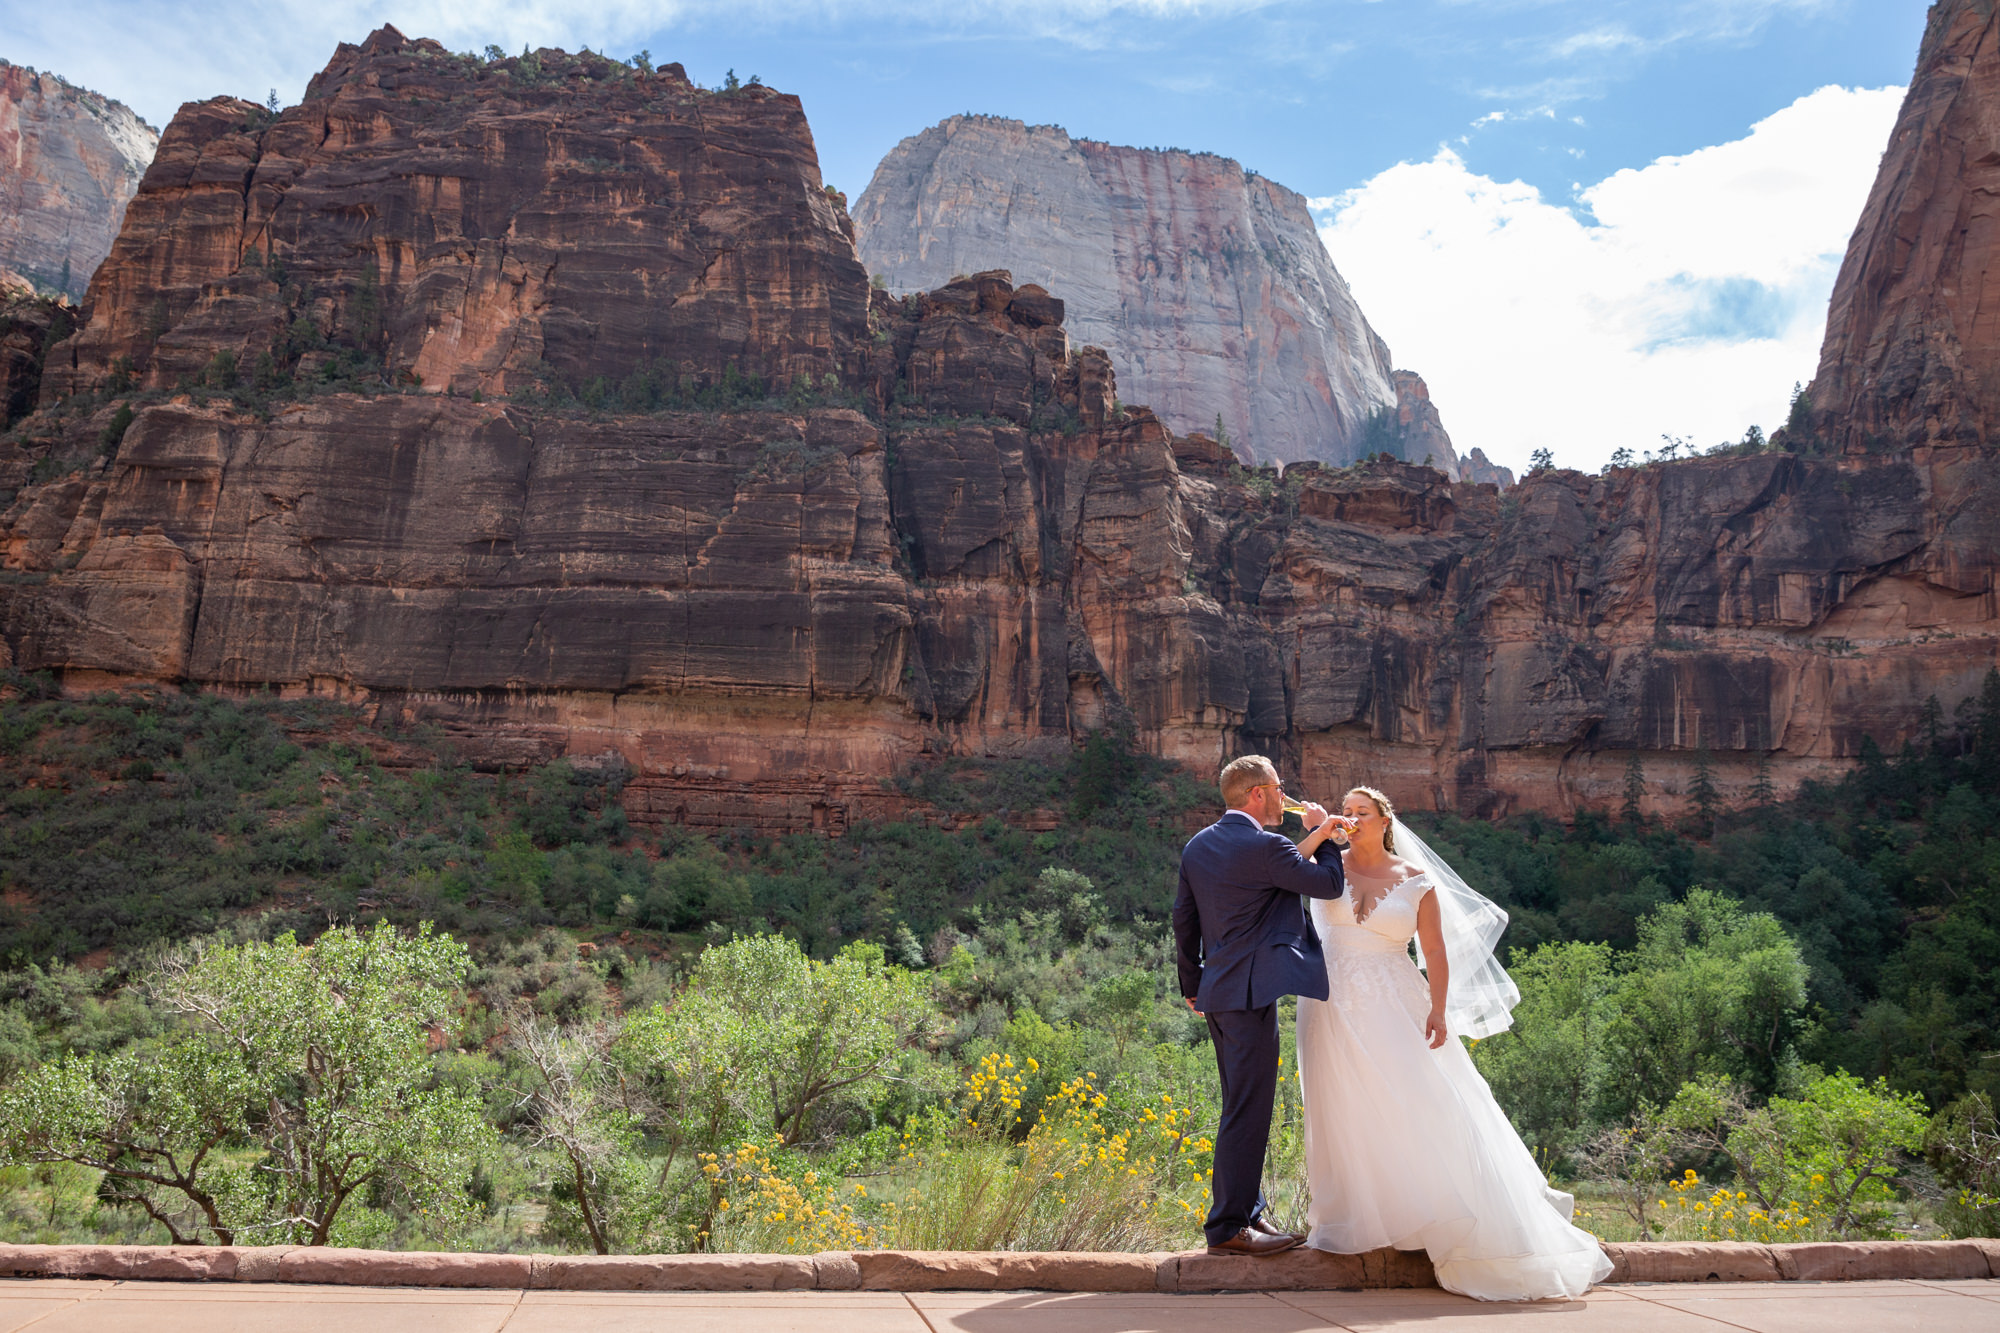 A bride and groom sip champagne on their elopement day after figuring out how to elope in Zion National Park.